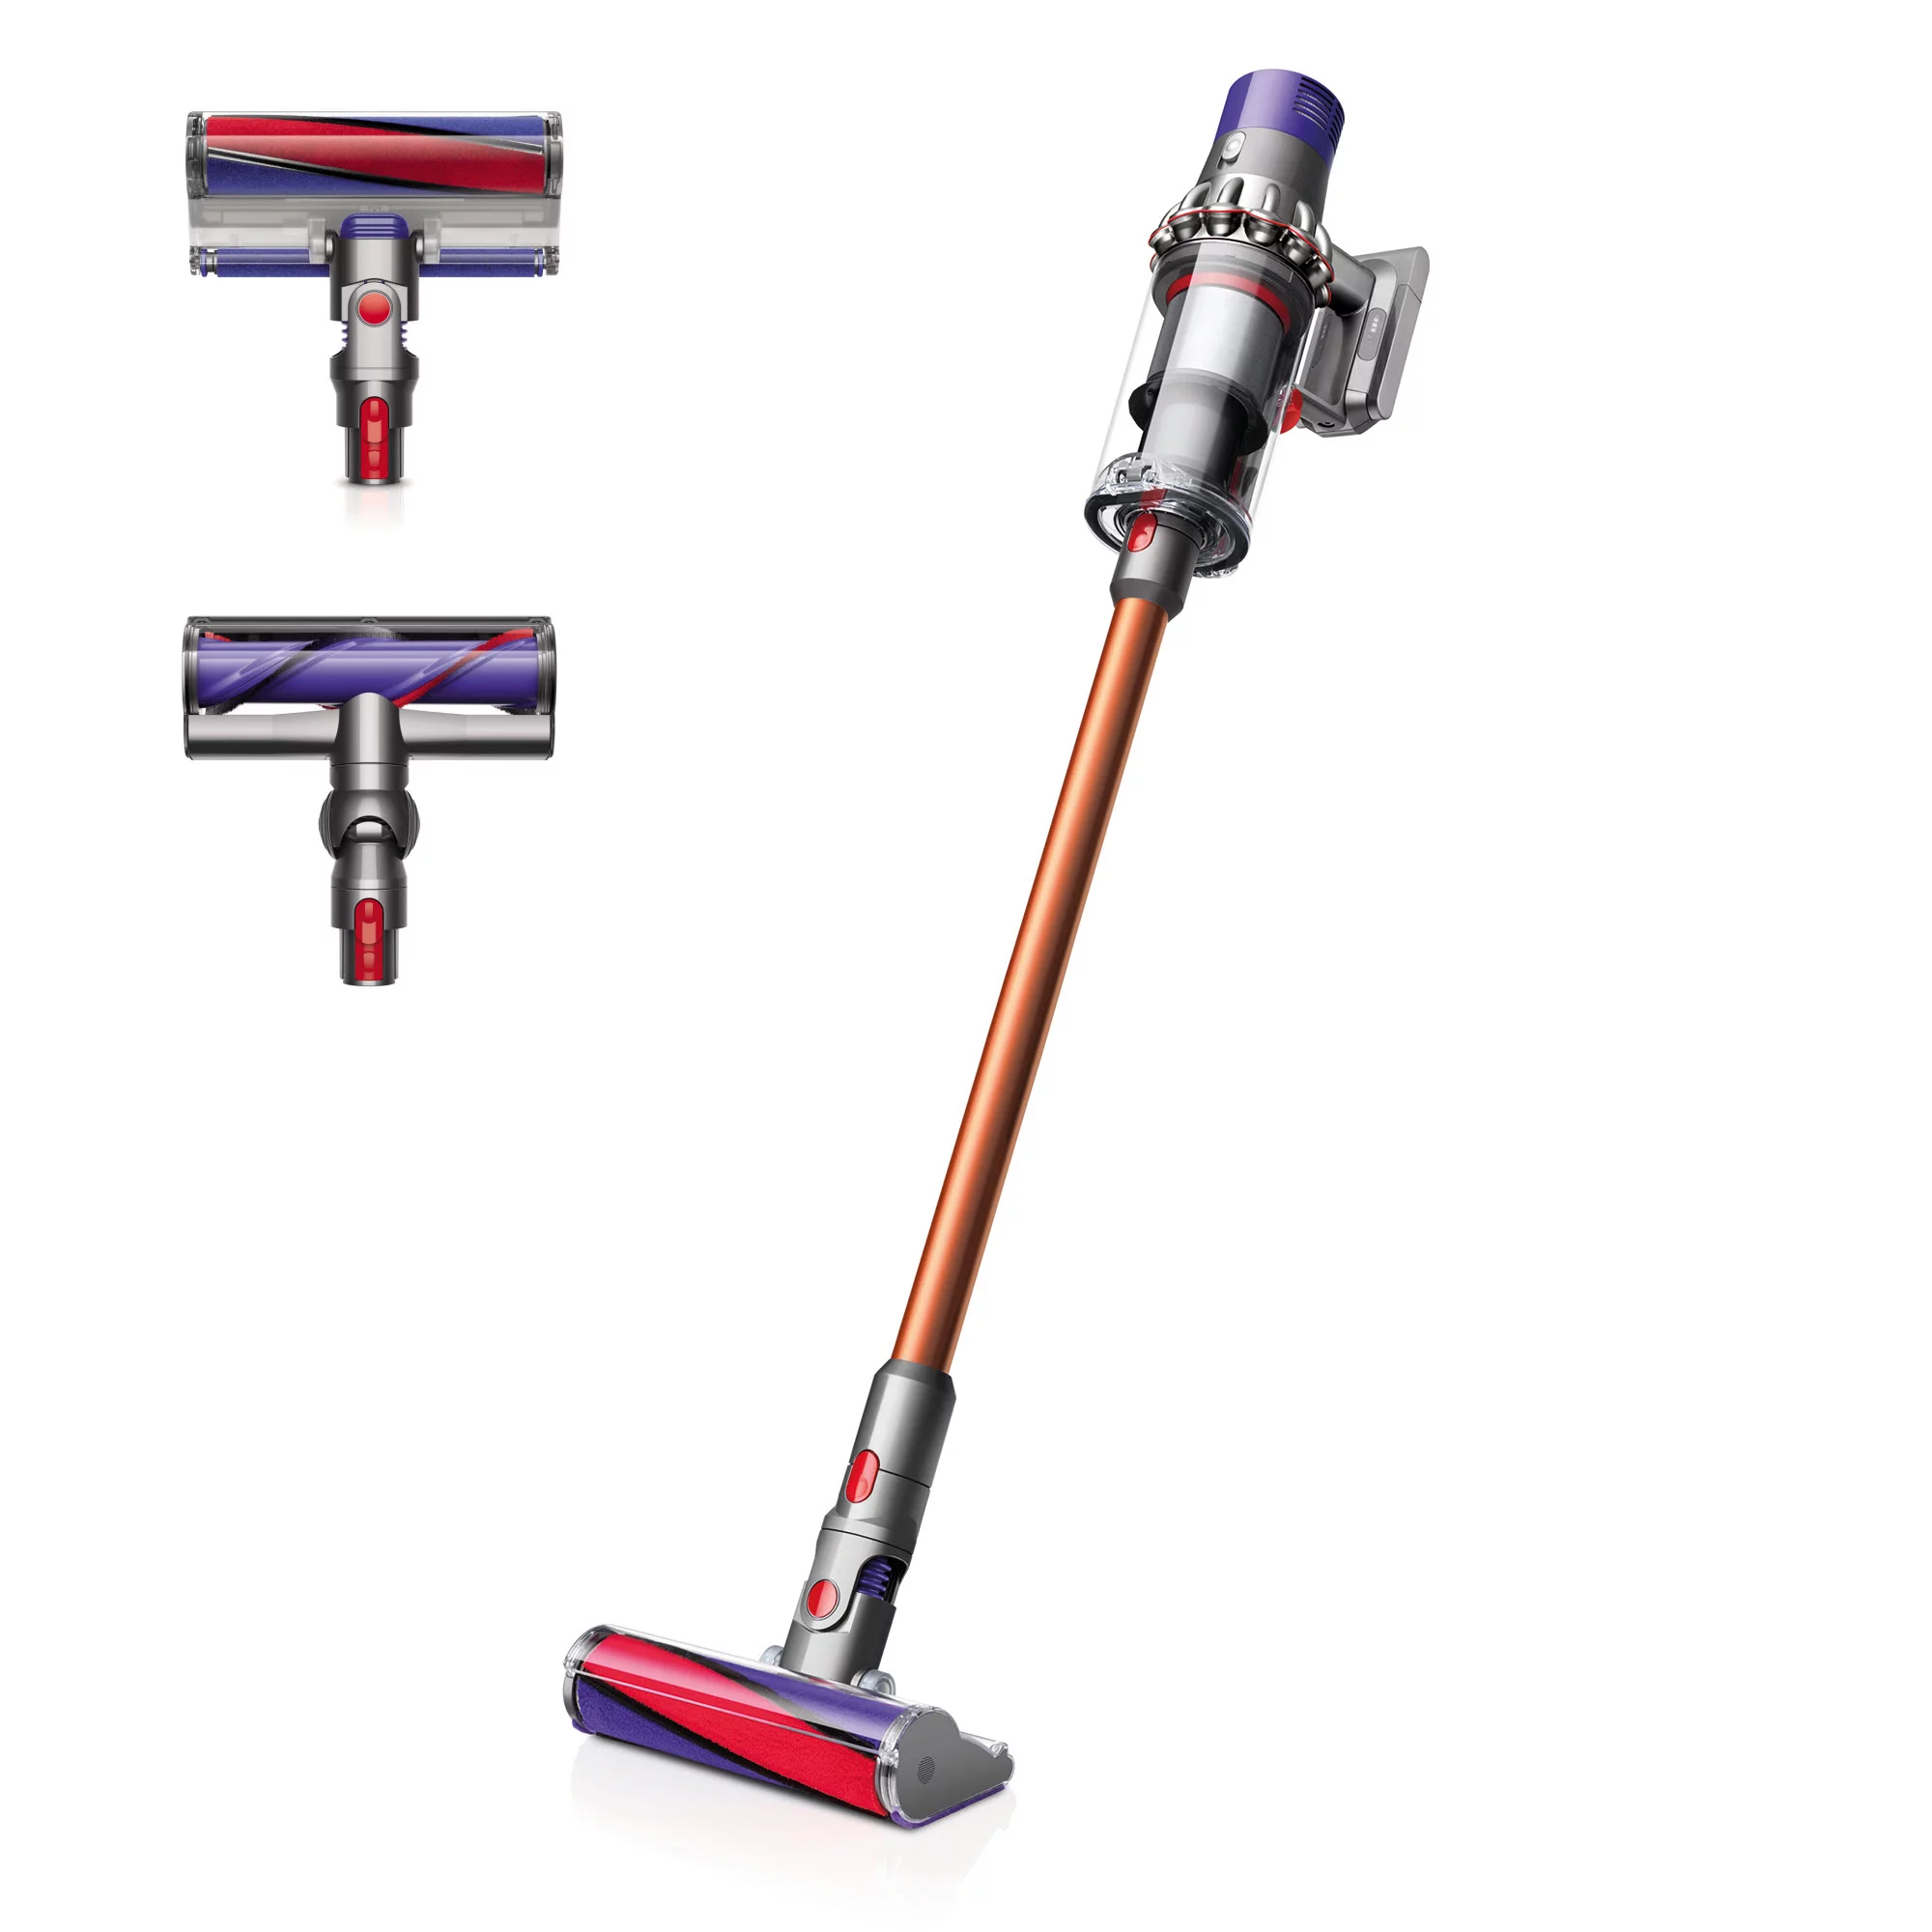 Revolutionize Your Cleaning Routine with the Dyson V10 Absolute: A Complete Overview